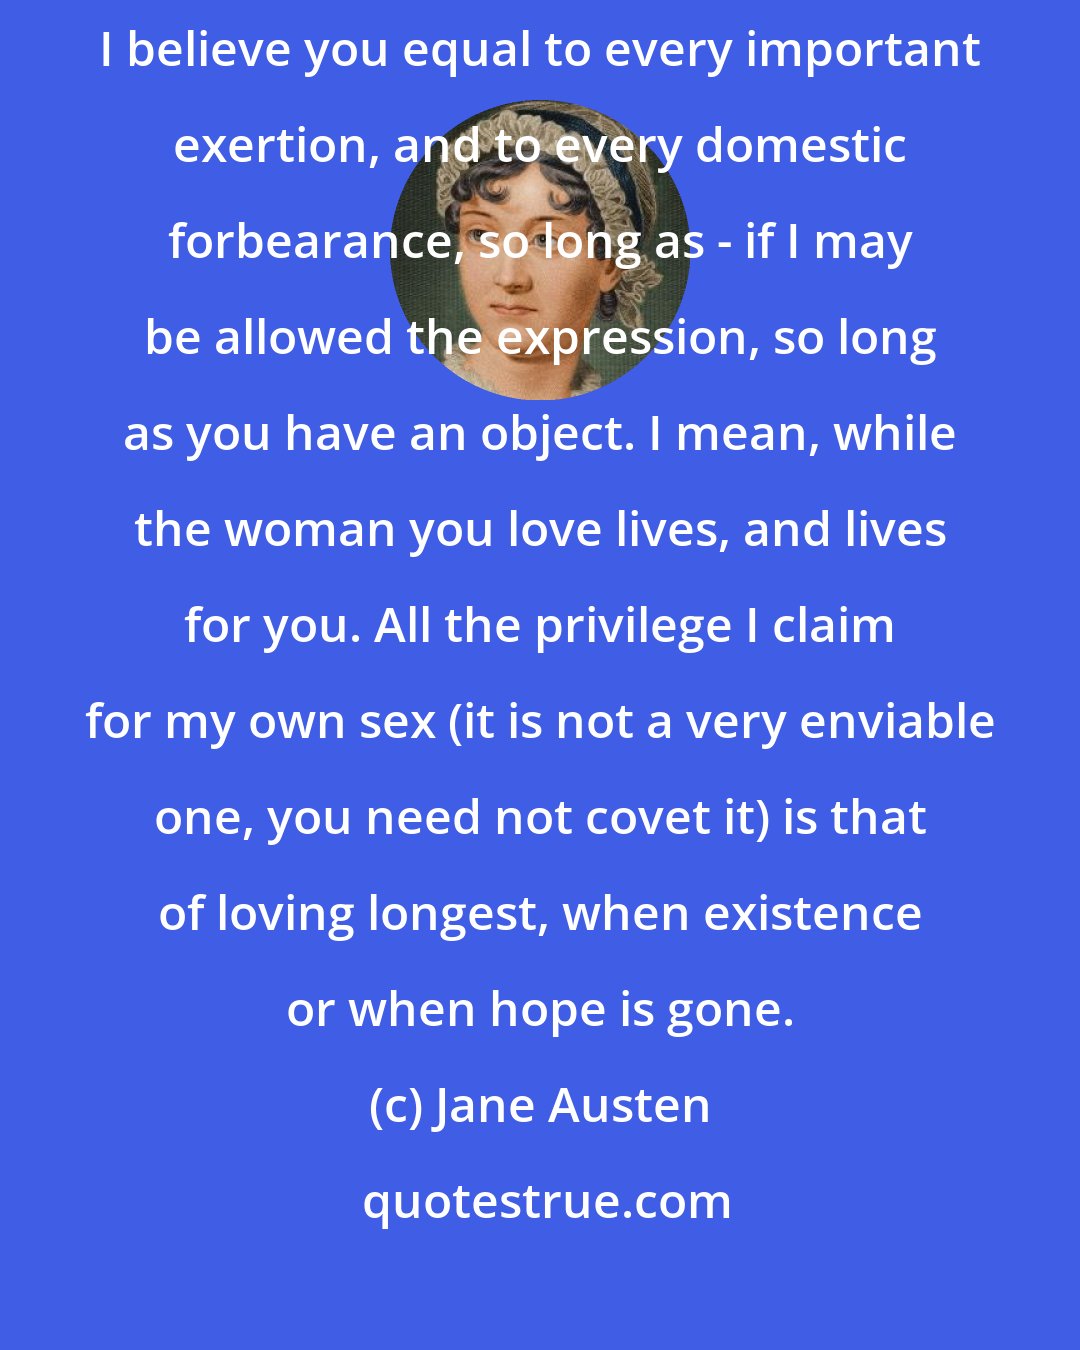 Jane Austen: I believe you [men] capable of everything great and good in your married lives. I believe you equal to every important exertion, and to every domestic forbearance, so long as - if I may be allowed the expression, so long as you have an object. I mean, while the woman you love lives, and lives for you. All the privilege I claim for my own sex (it is not a very enviable one, you need not covet it) is that of loving longest, when existence or when hope is gone.